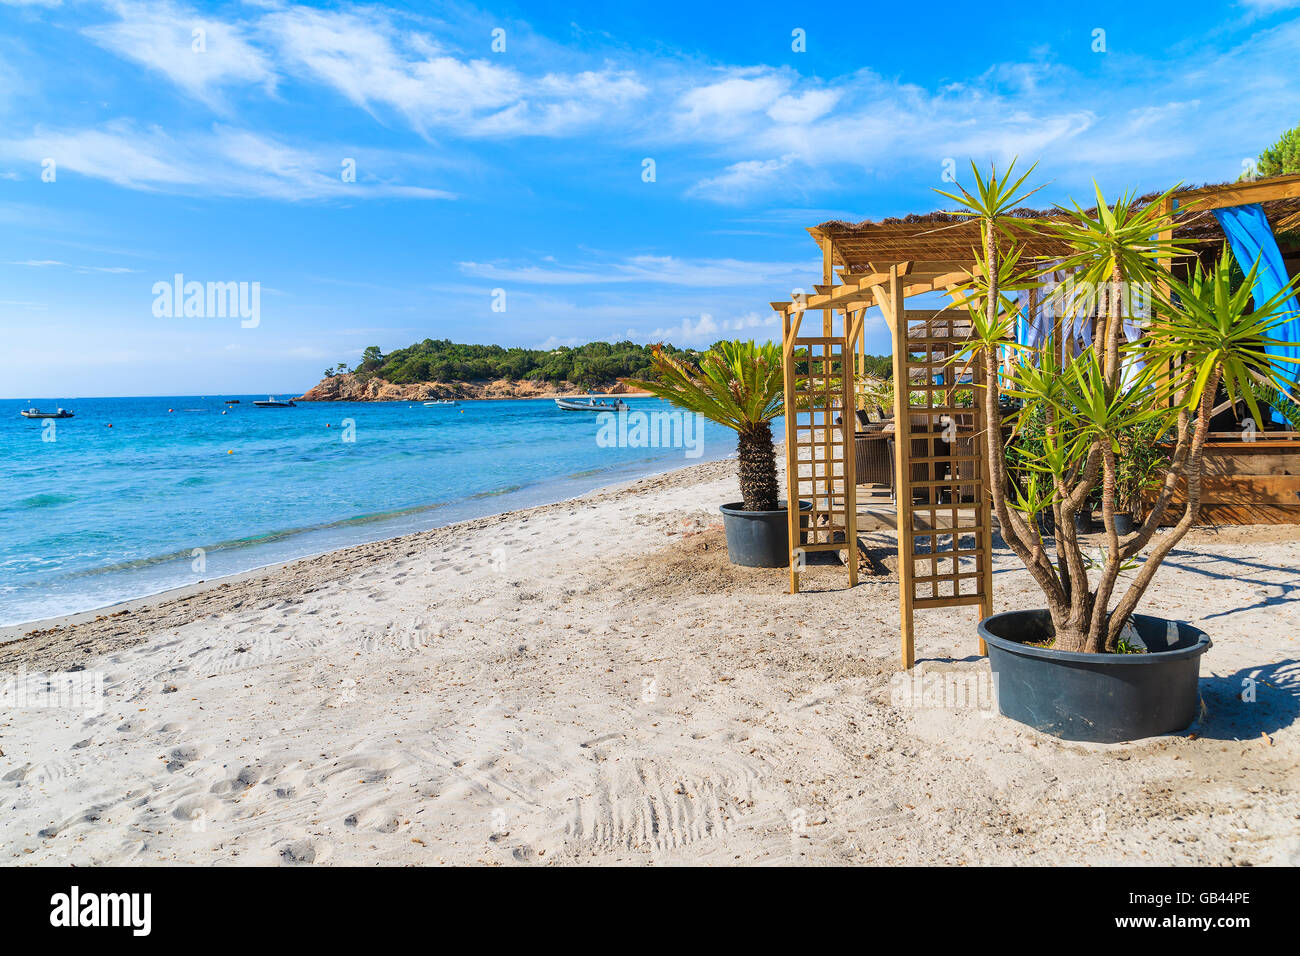 A view of Palombaggia beach on sunny summer day, Corsica island, France Stock Photo